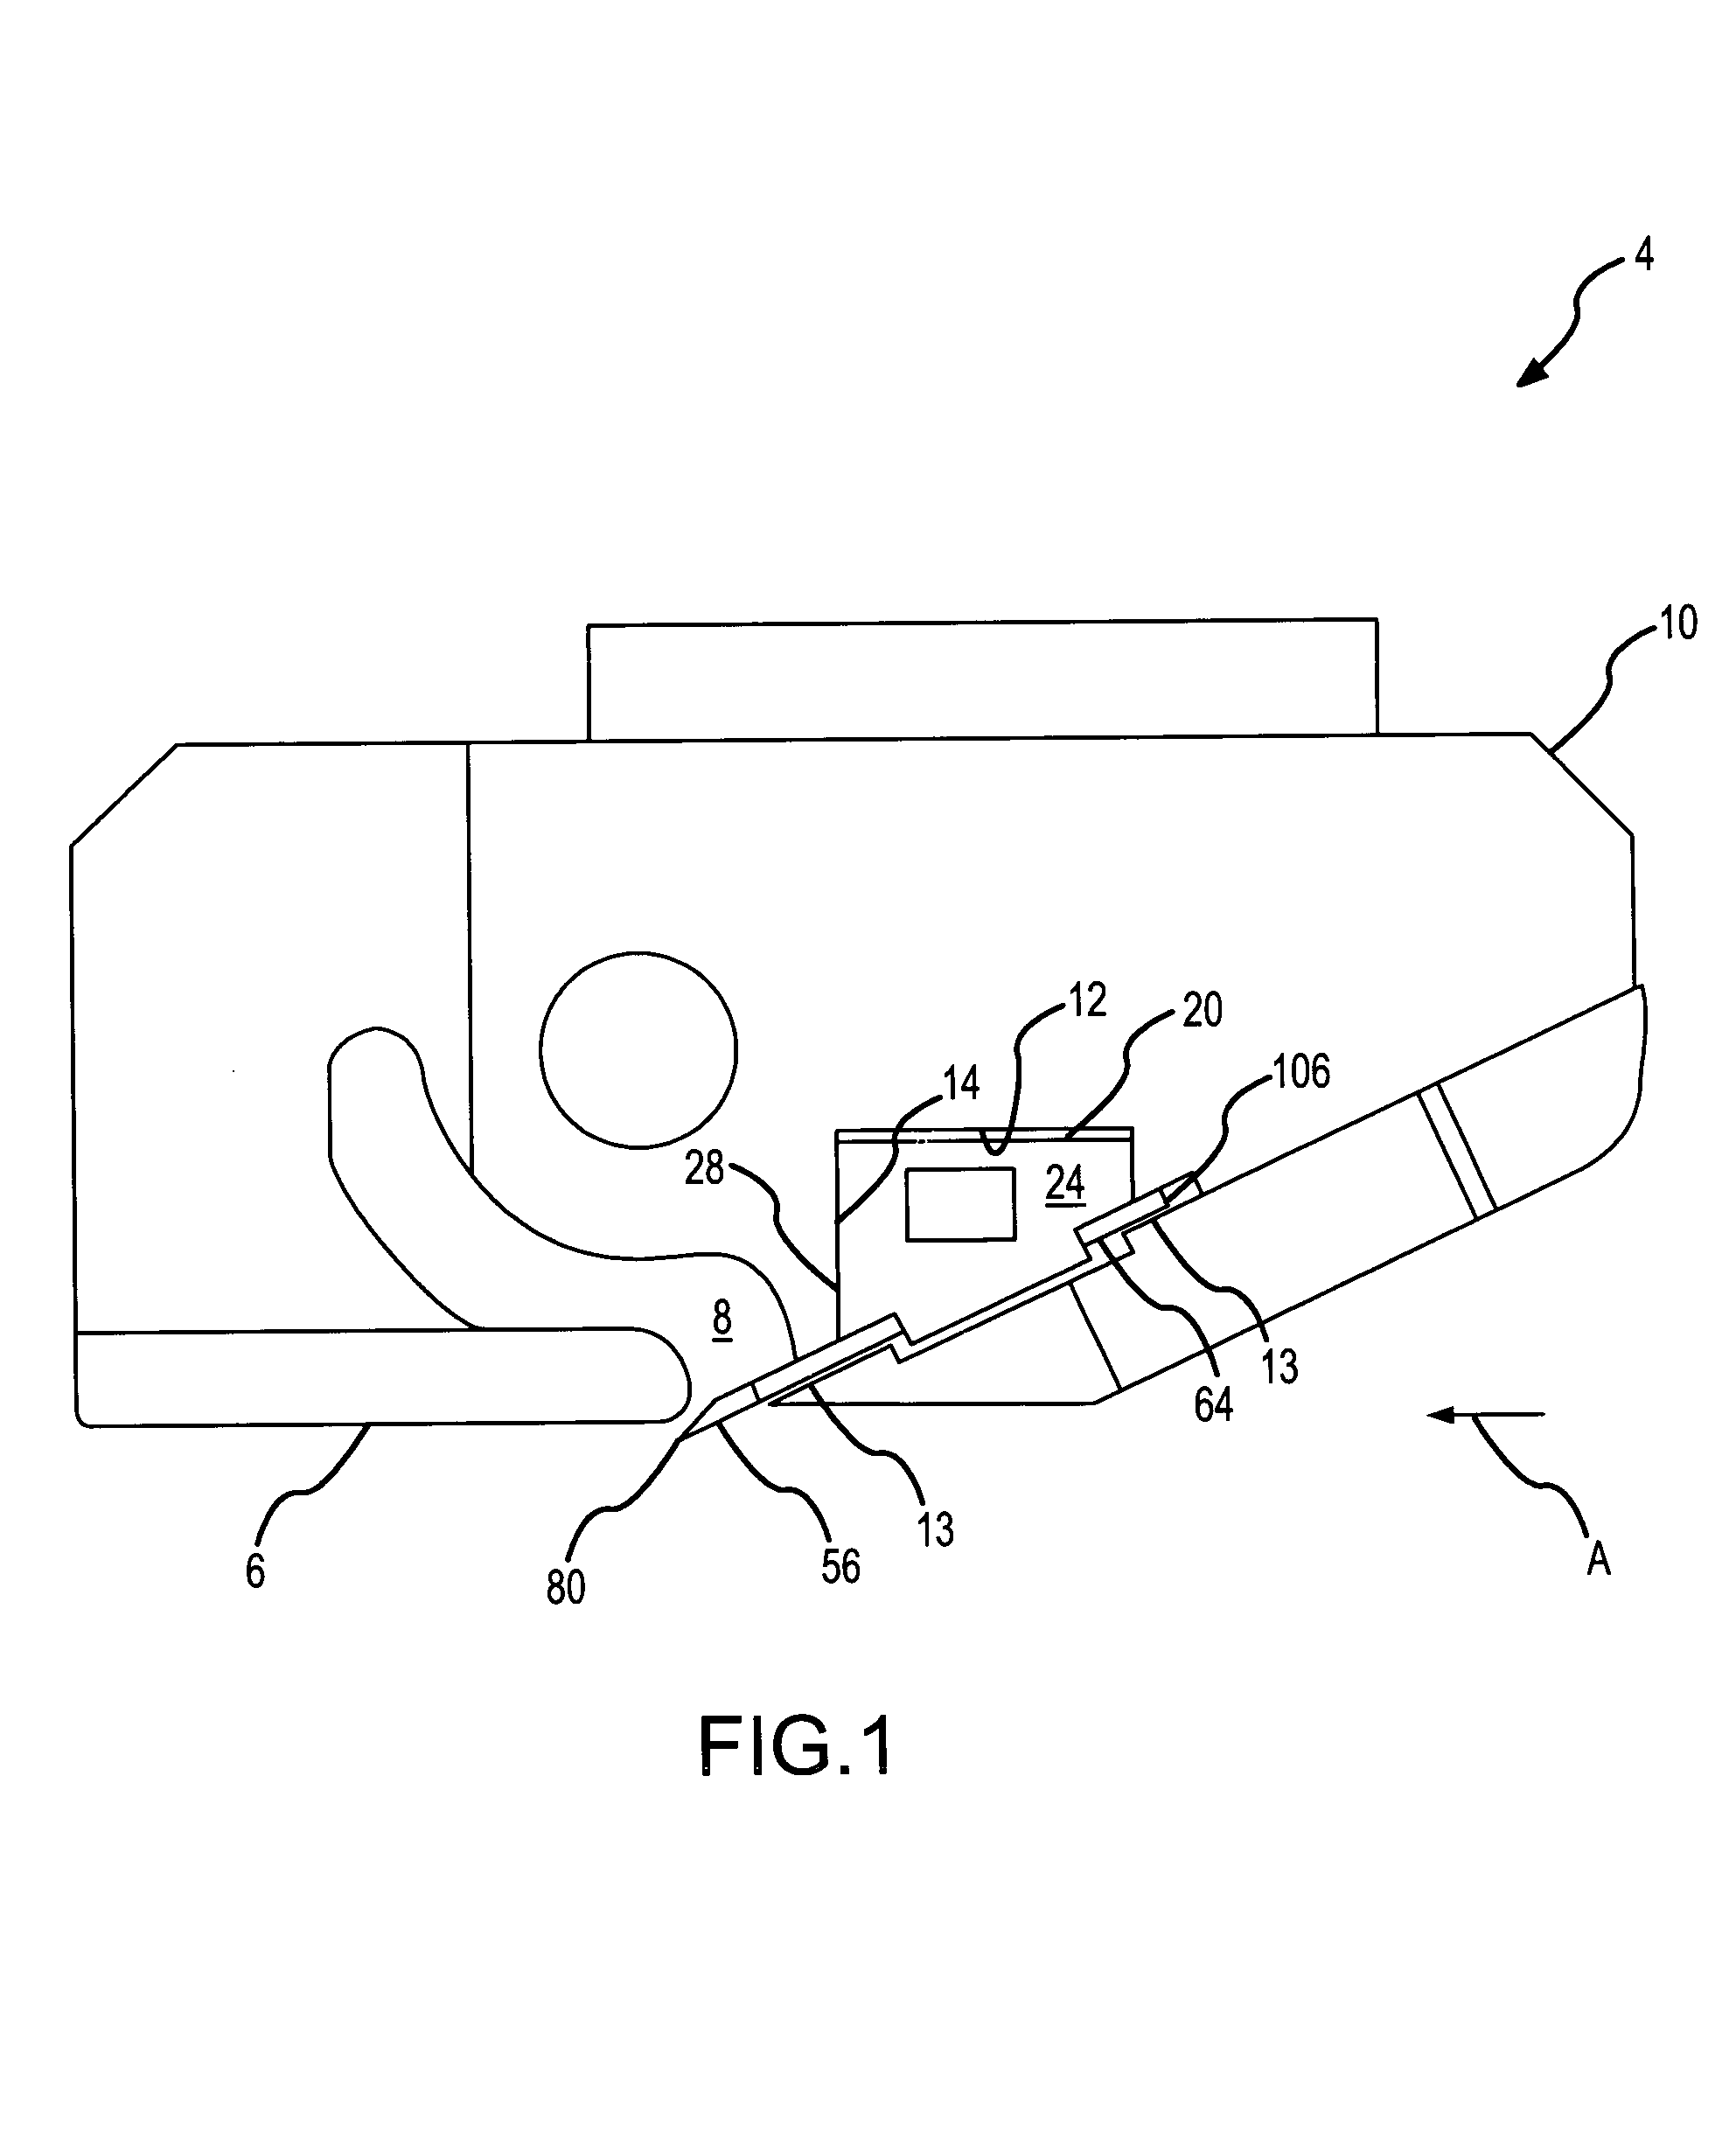 Multi-fixture assembly of cutting tools